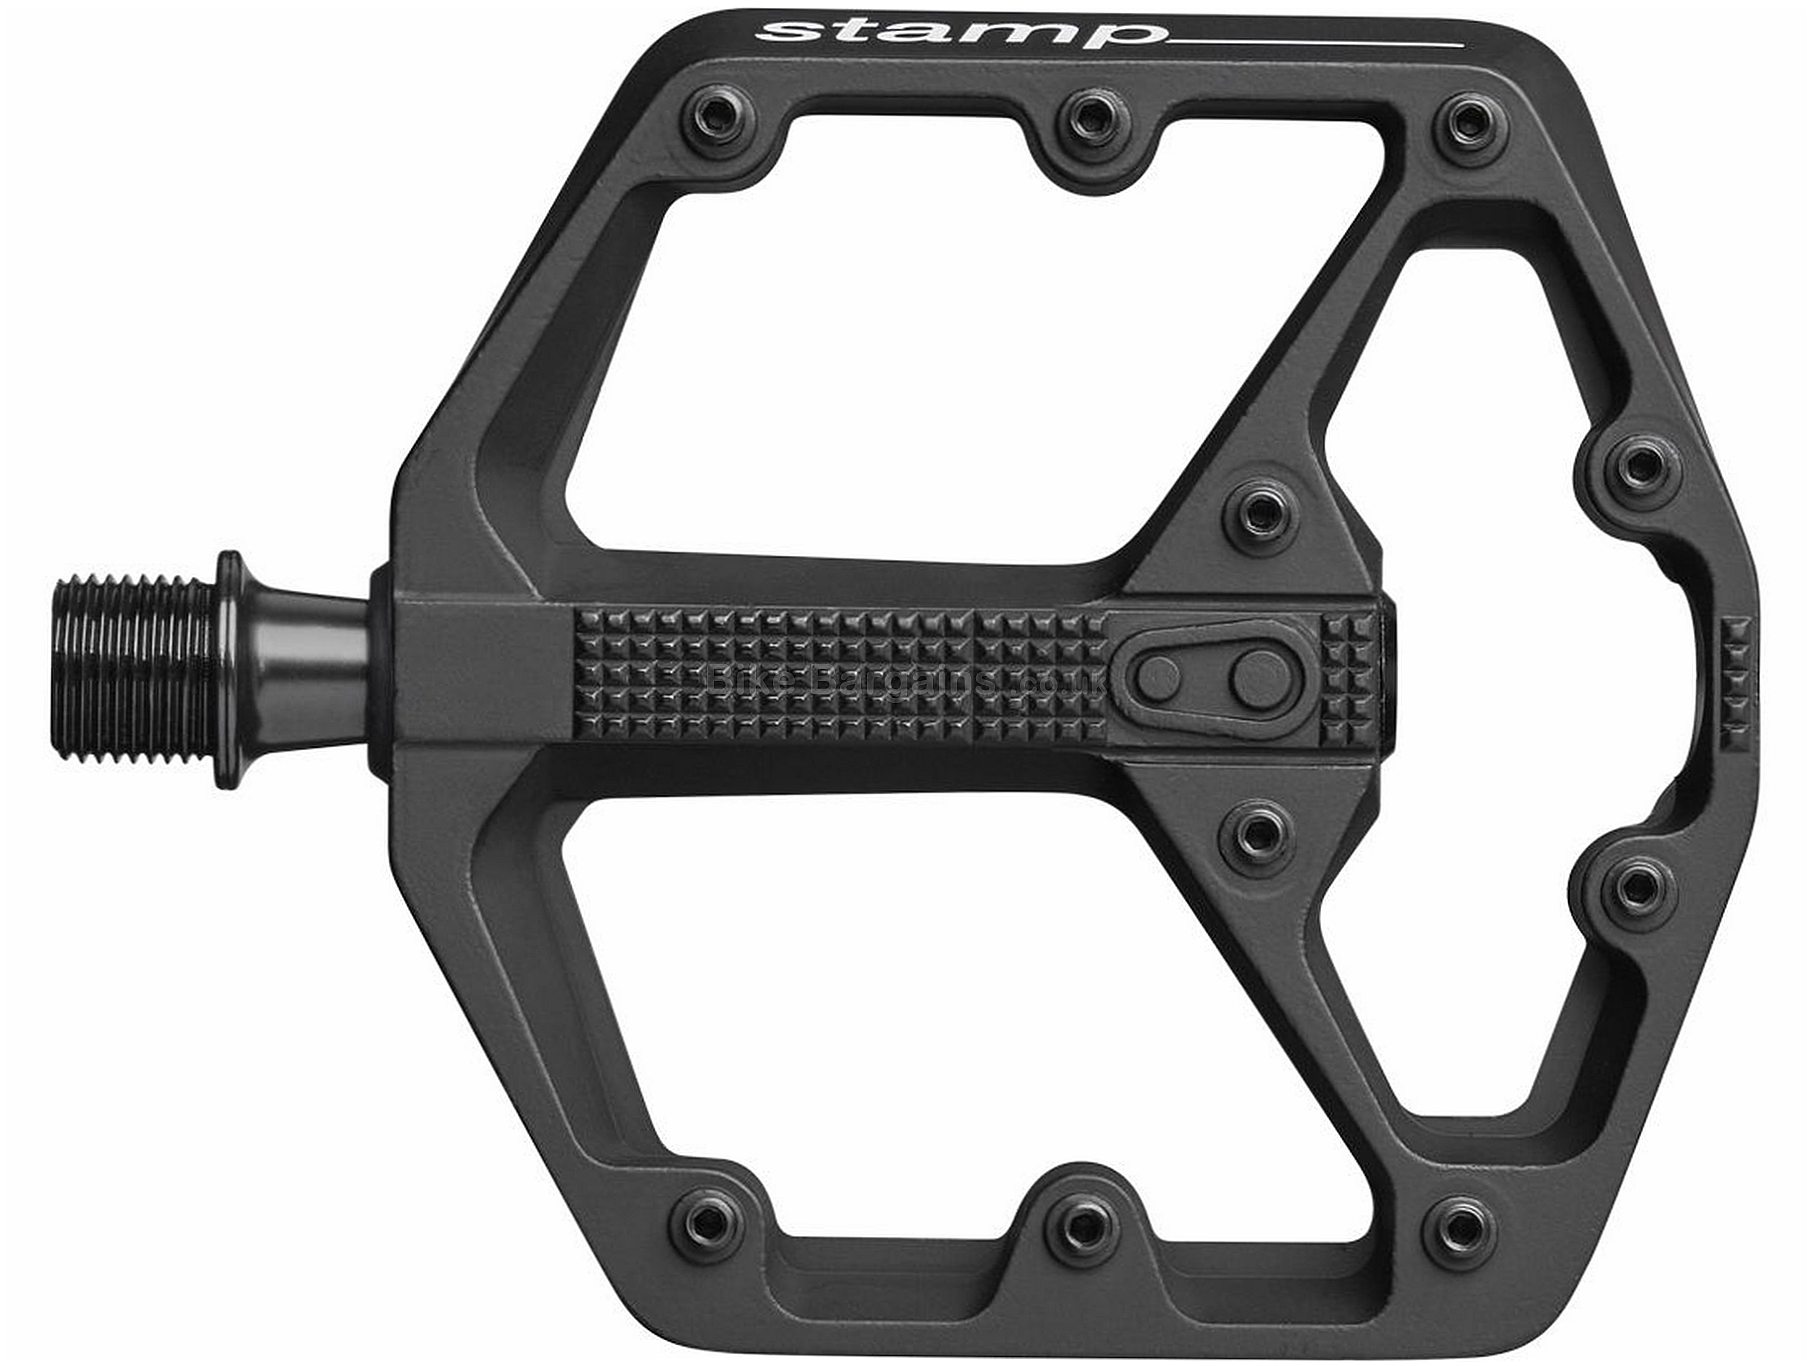 Superioriteit whisky Hoogte Crank Brothers Stamp 11 Flat Pedals - £80! | Pedals